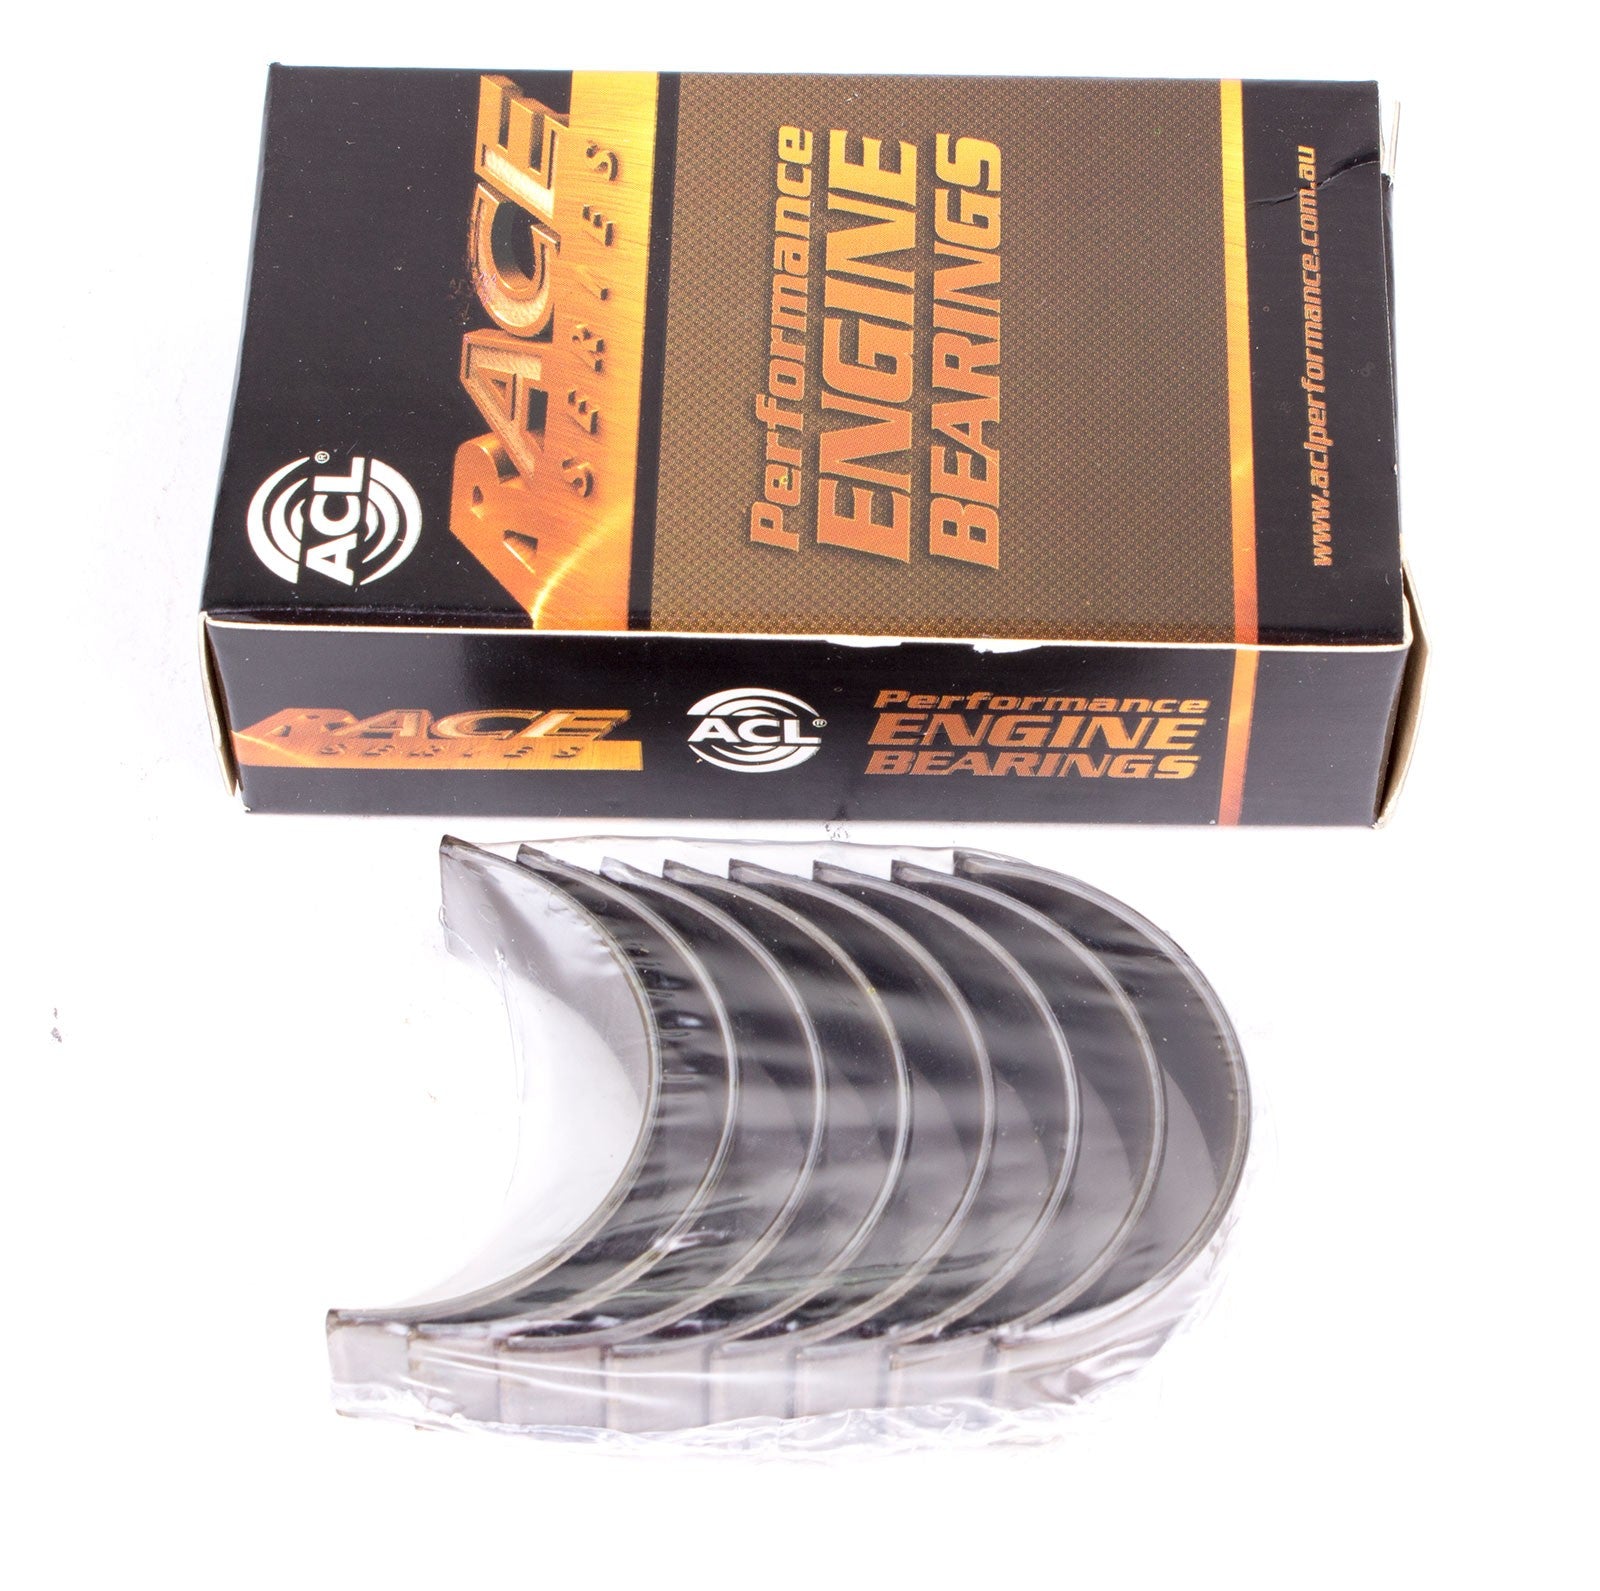 ACL 5M1010H-20 Main bearing set (ACL Race Series) Photo-0 